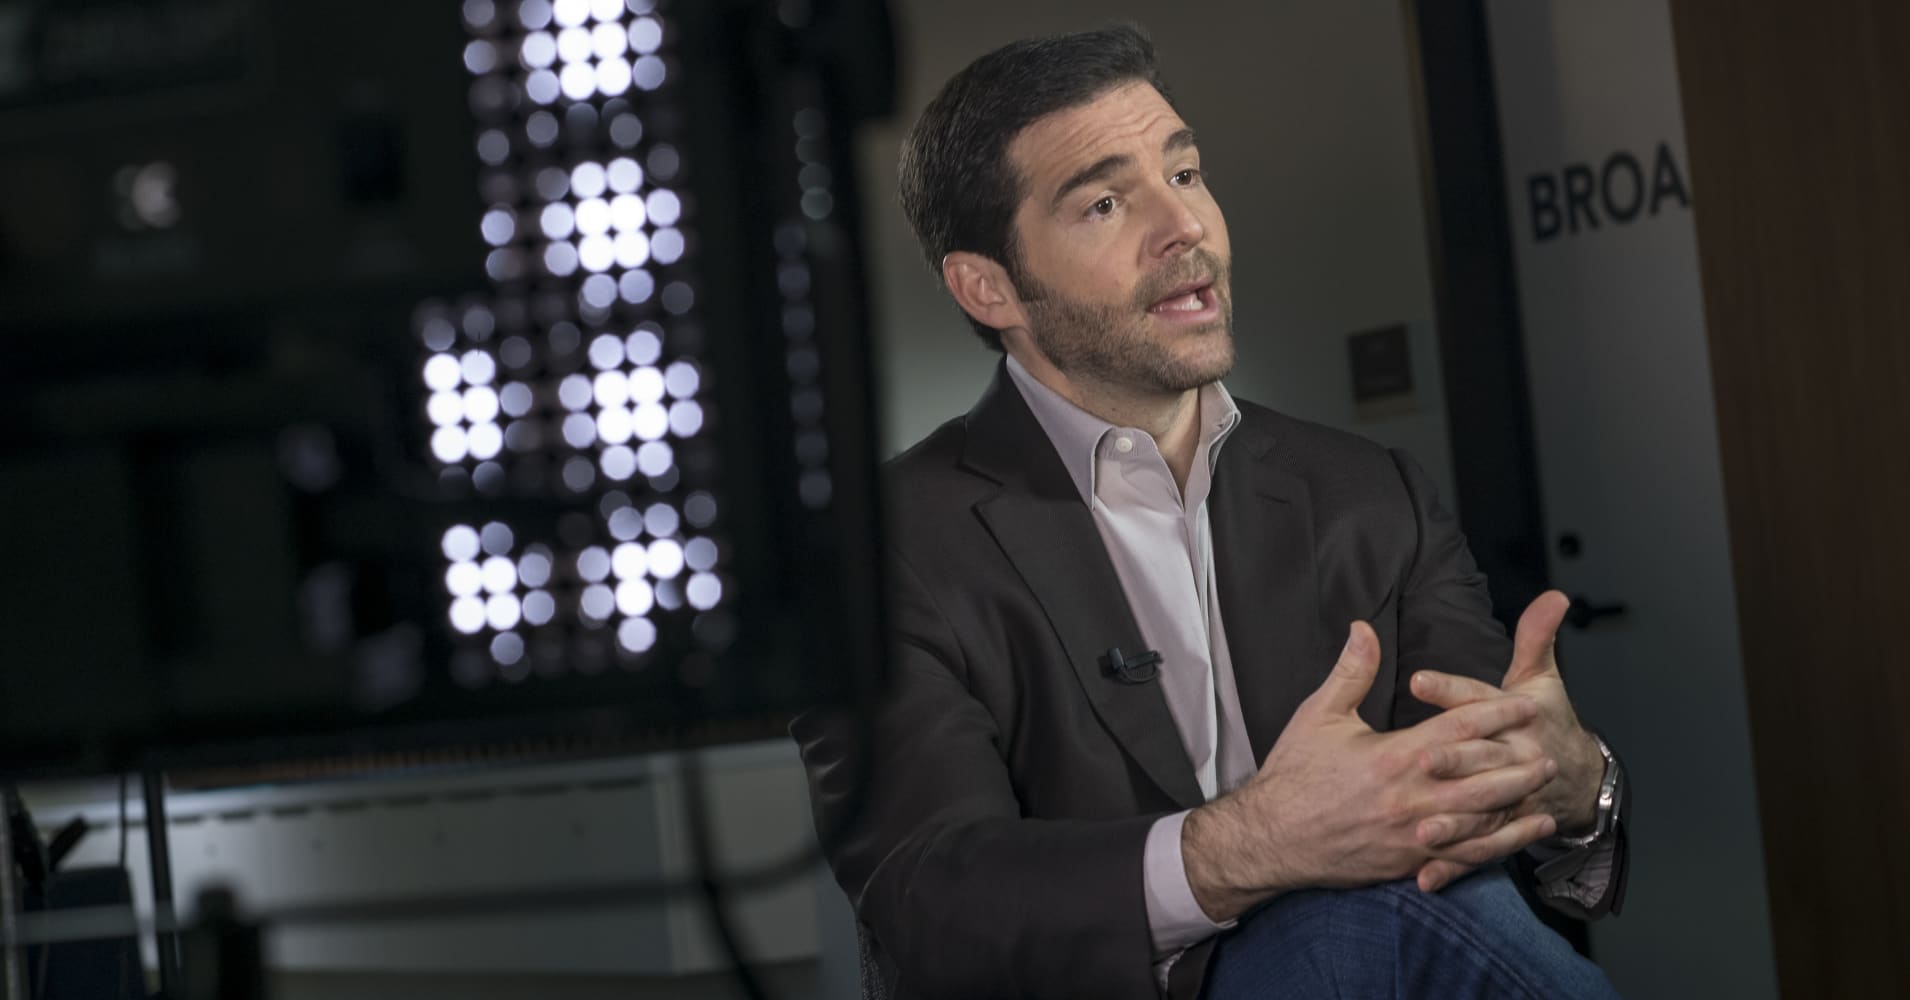 LinkedIn CEO shares the 2 interview questions he always asks1910 x 1000